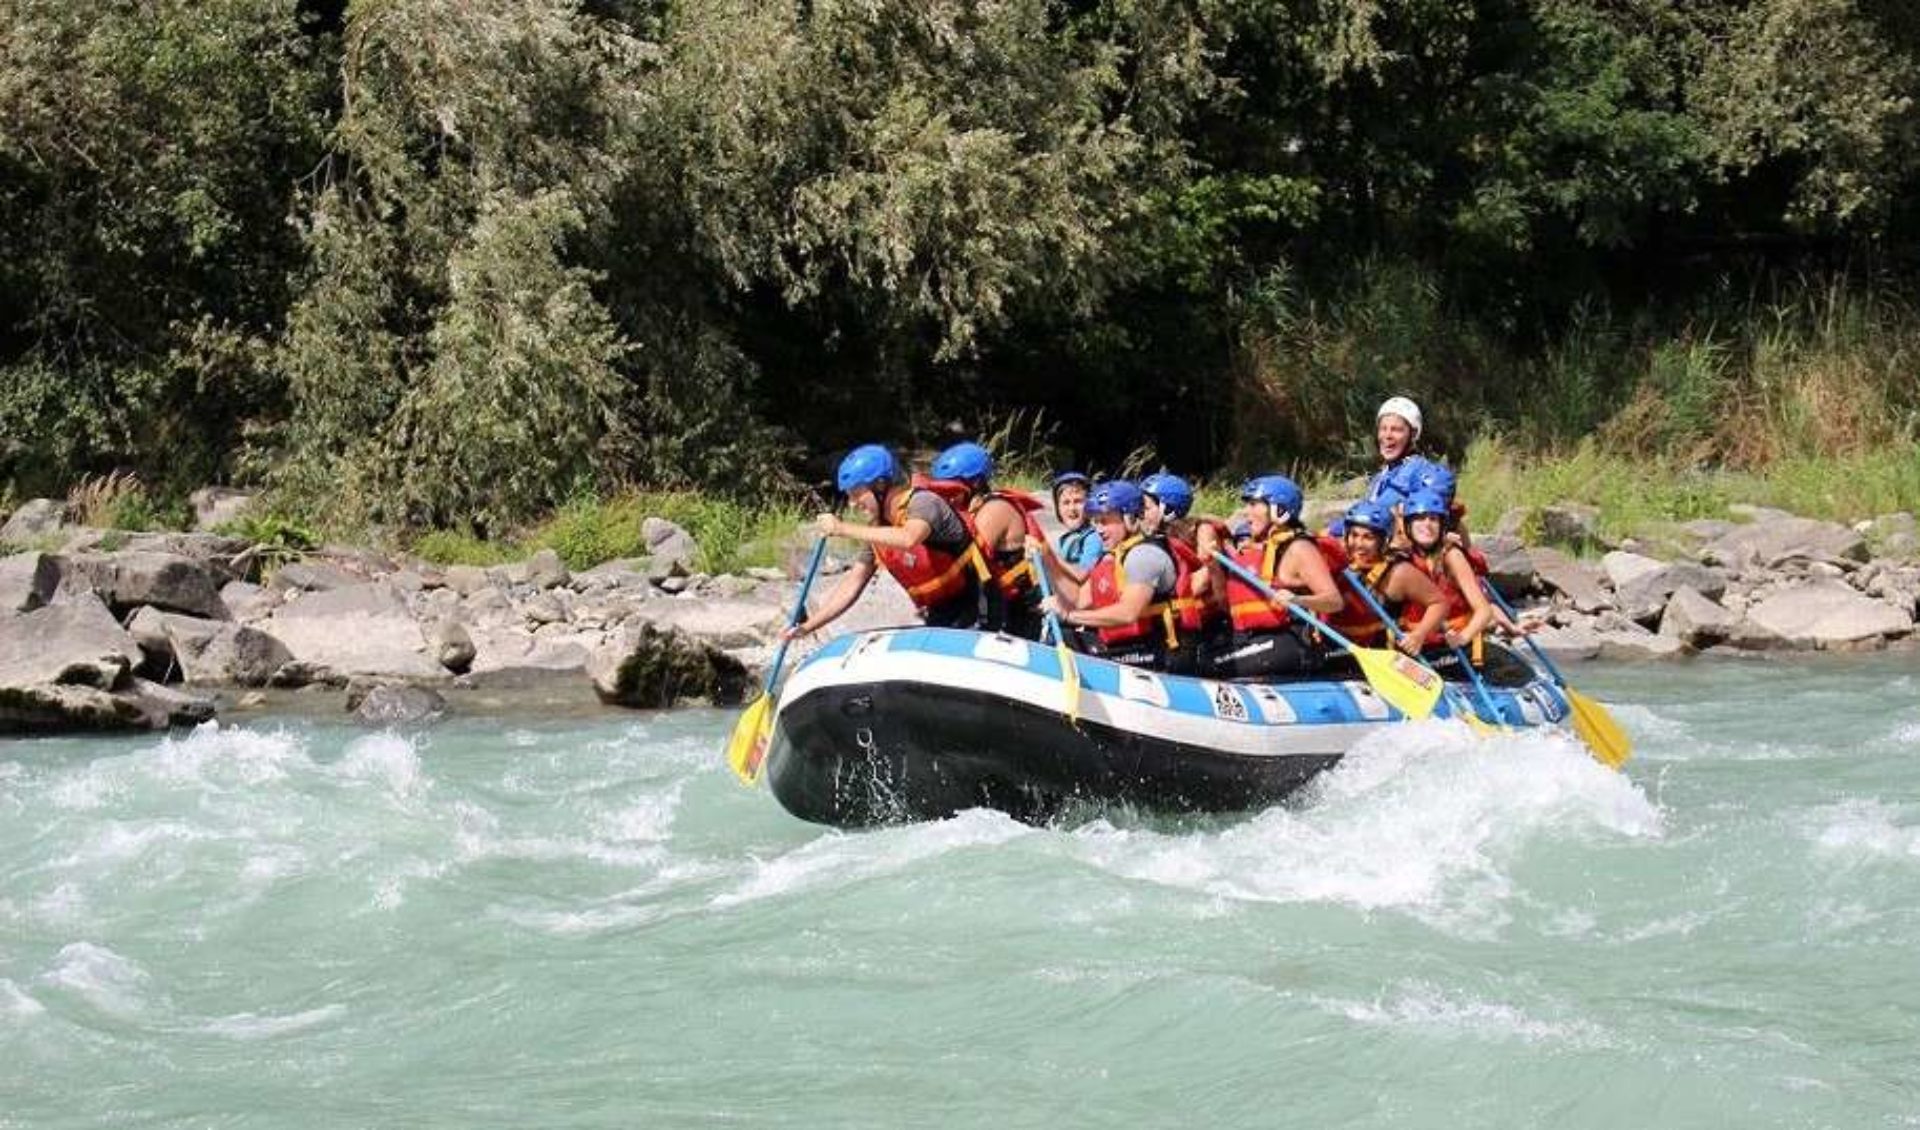 Rafting Castione Andevenno